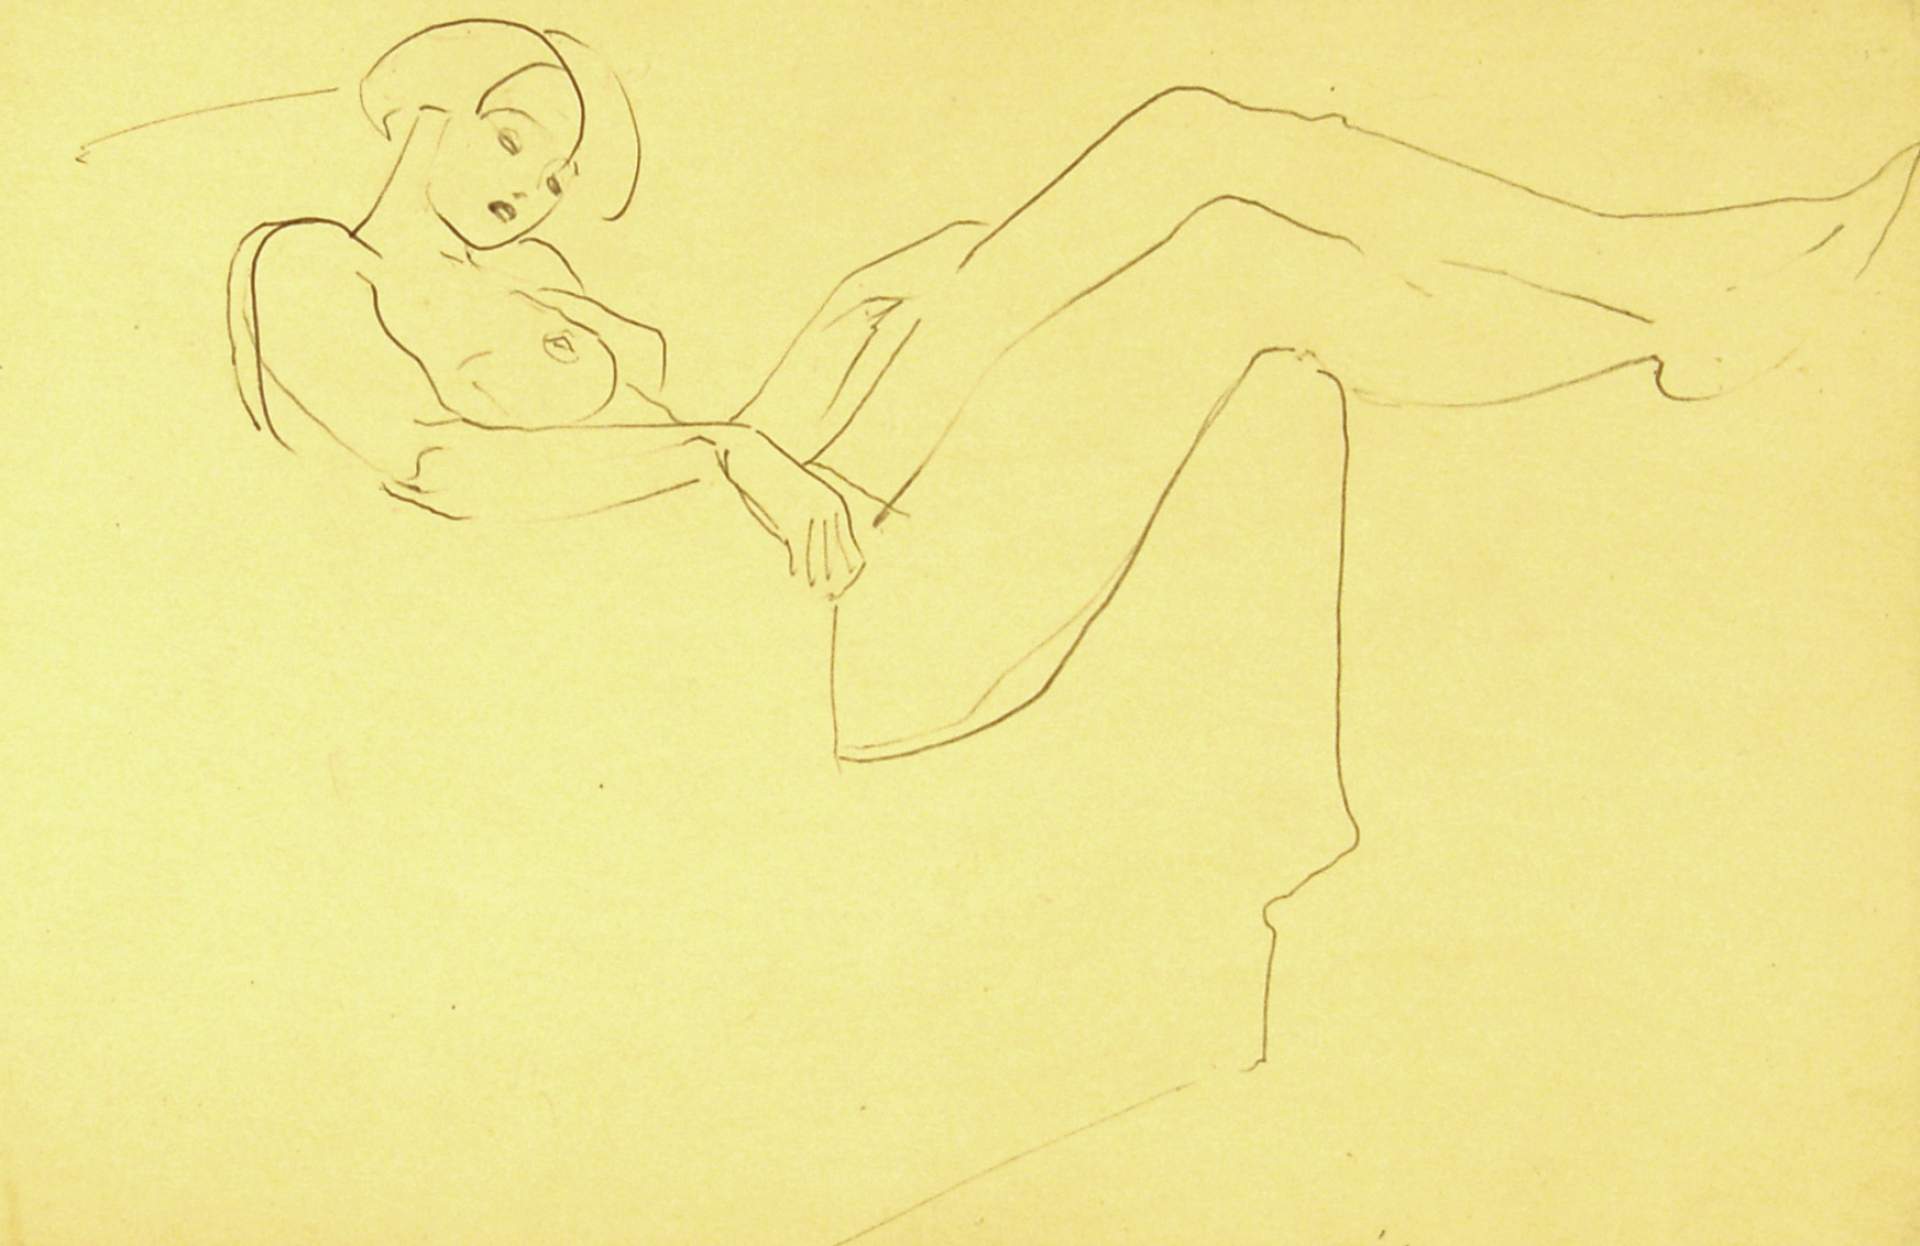 Sketch of Female in Chair, Leg Over on Arm